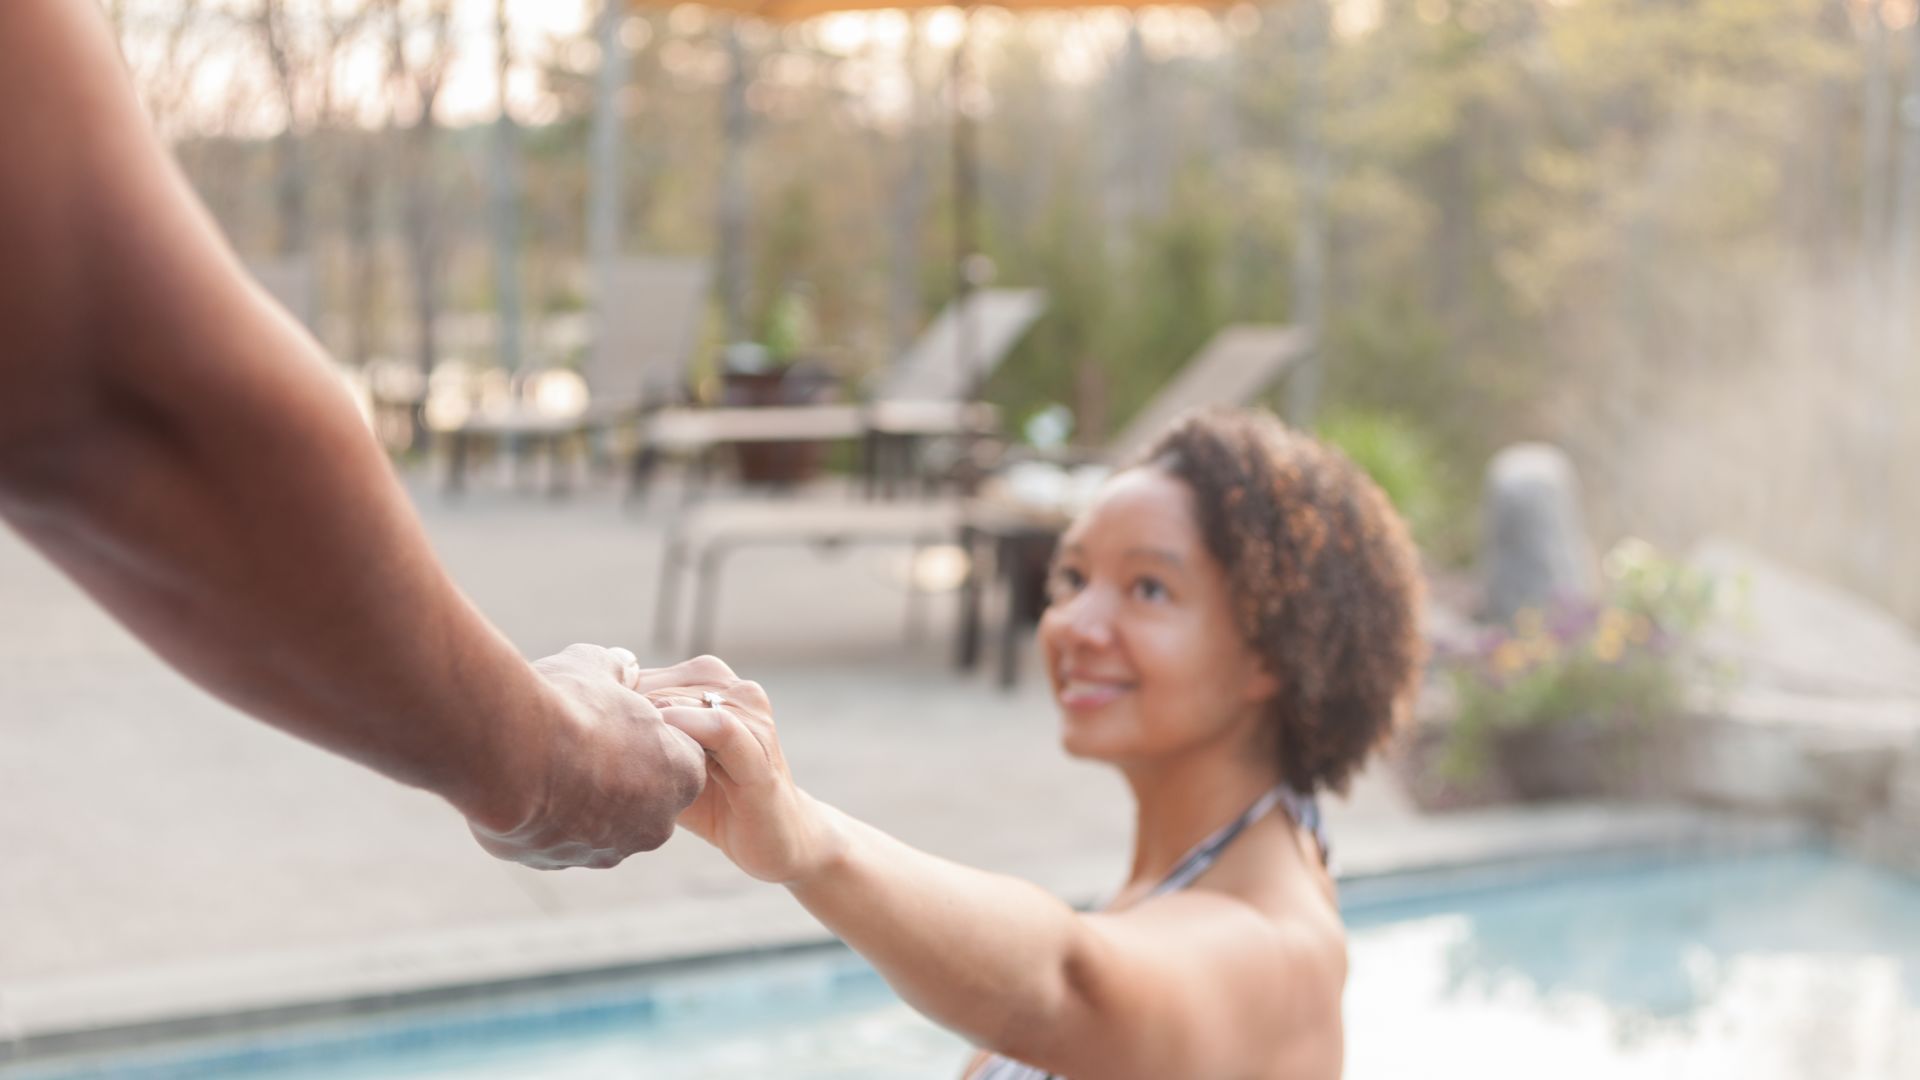 A woman smiling and holding a man's hand pulling him into an outdoor whirlpool